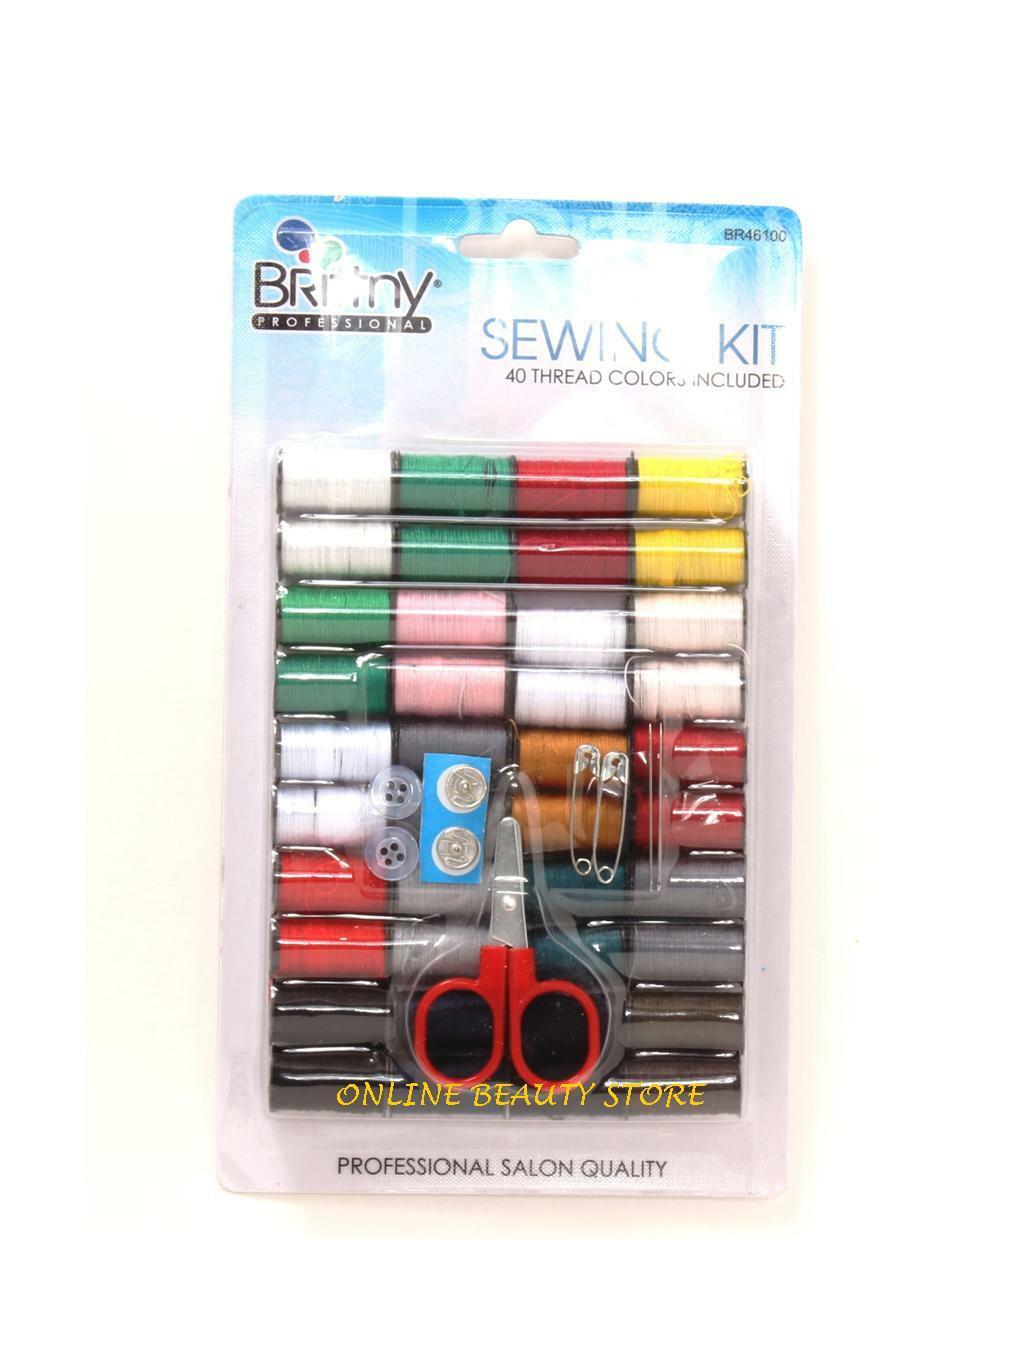 Sewing Travel Kit 49 Pcs, Color Thread, Scissors, Buttons, Needles, Safety Pins